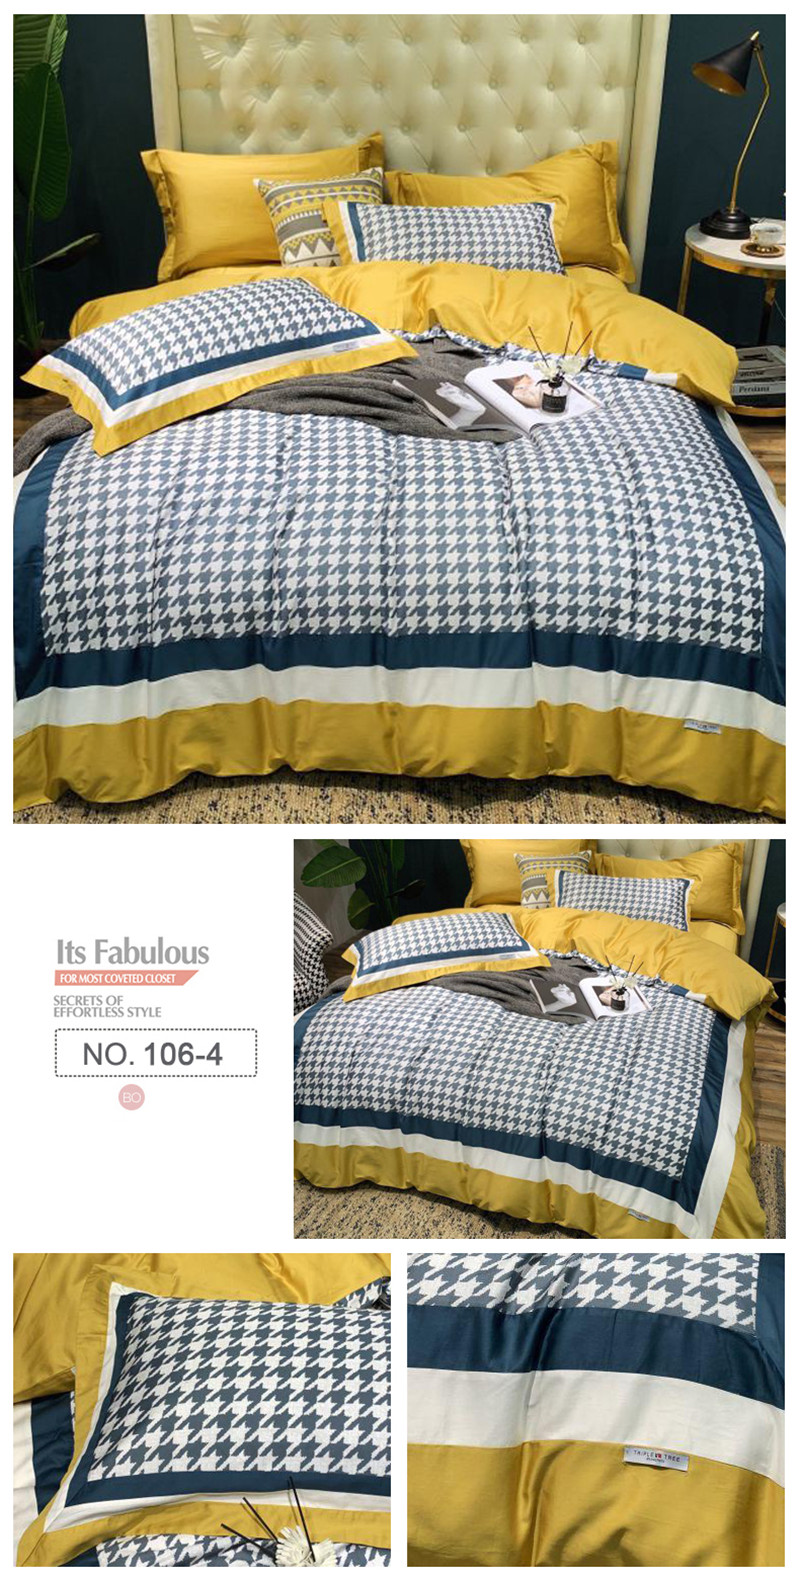 For 3PCS Full Fashion Style Bedding